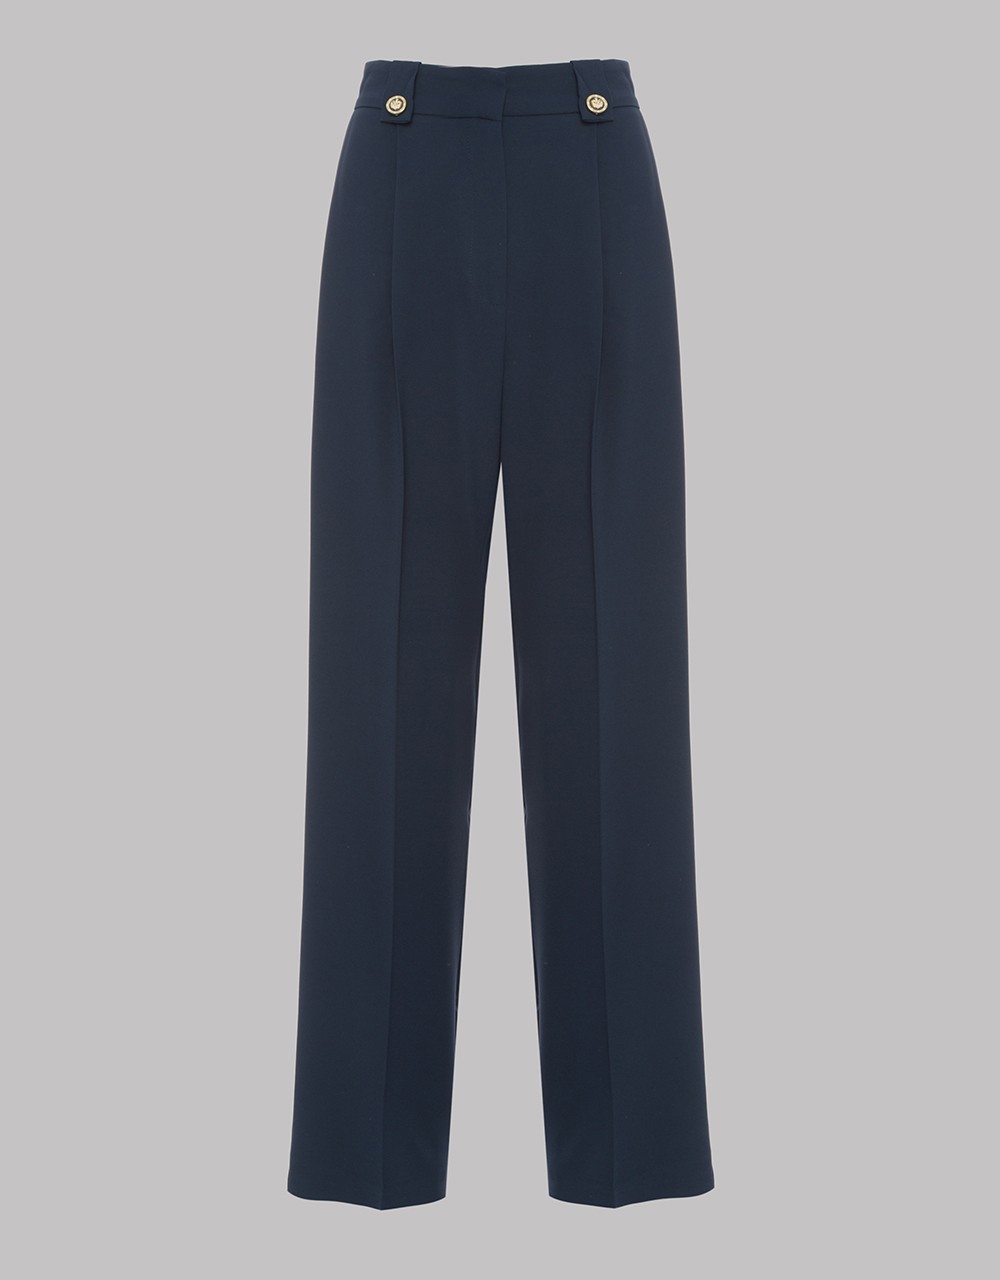 High rise flared trousers with decorative buttons